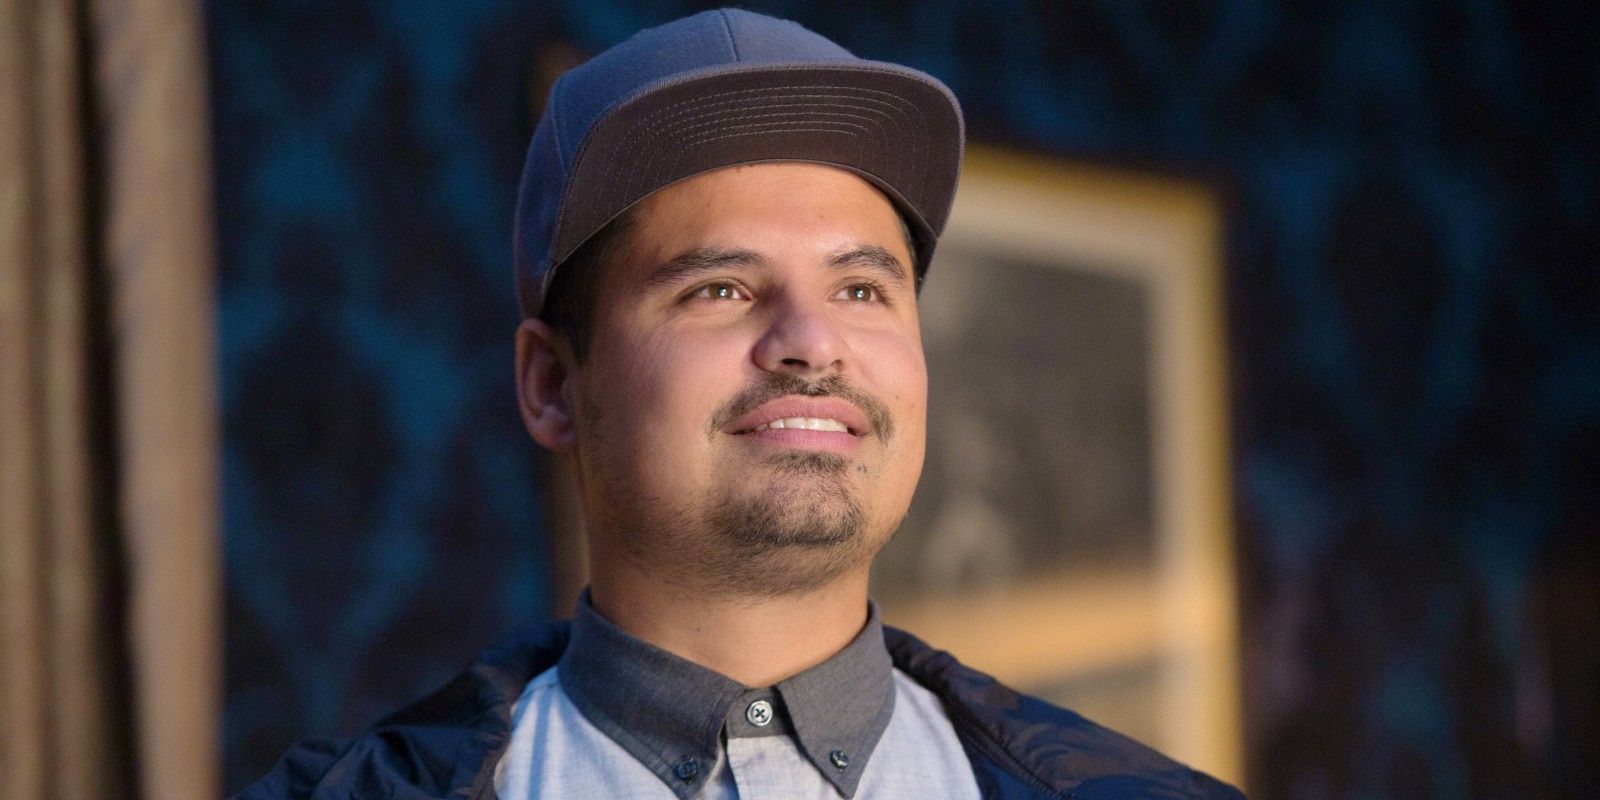 Michael Pena as Luis from the Ant-Man movies